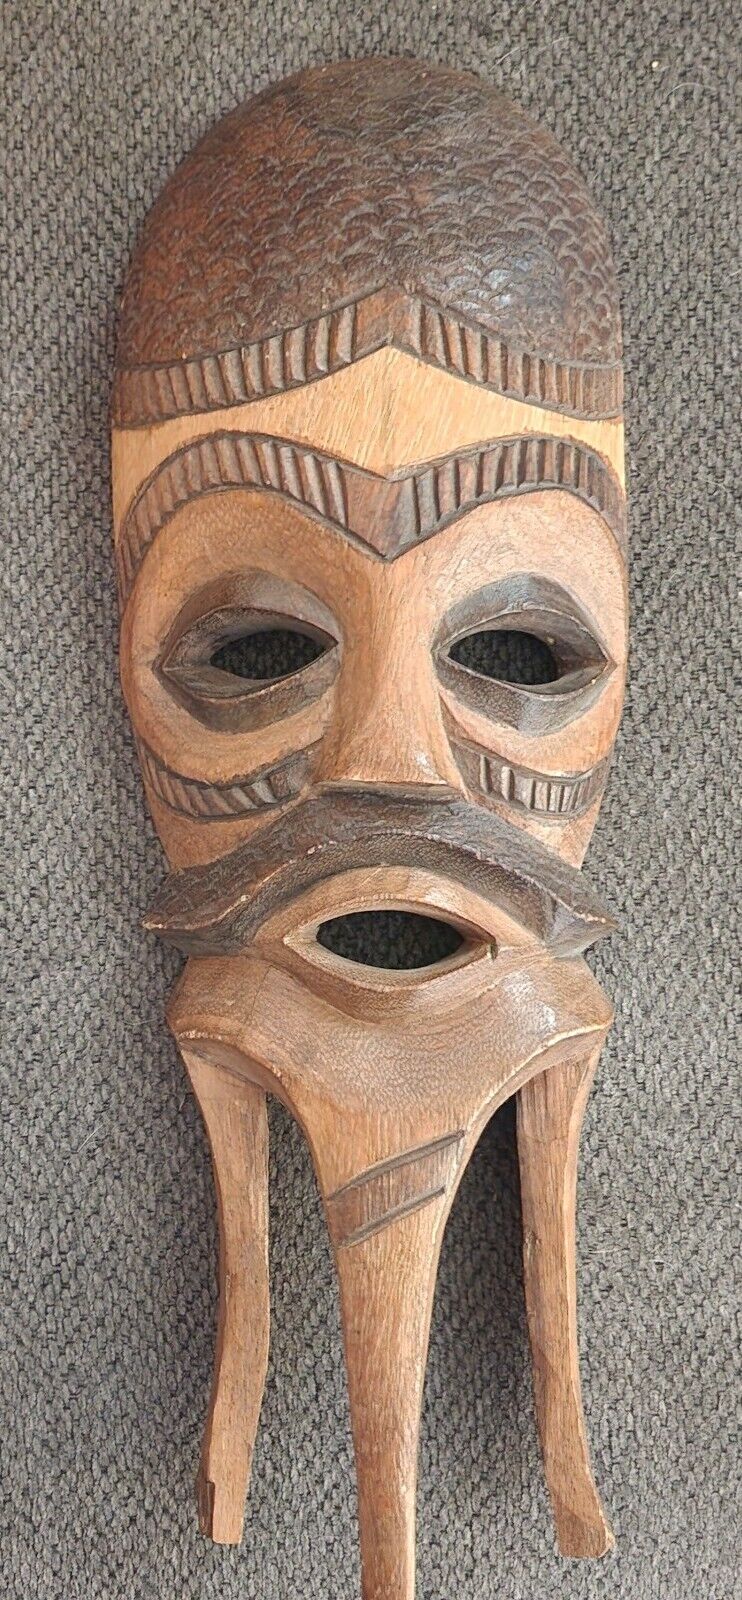 Handcrafted African Wood Masks - Spoons Authentic Artisanal Decor SEE PICS